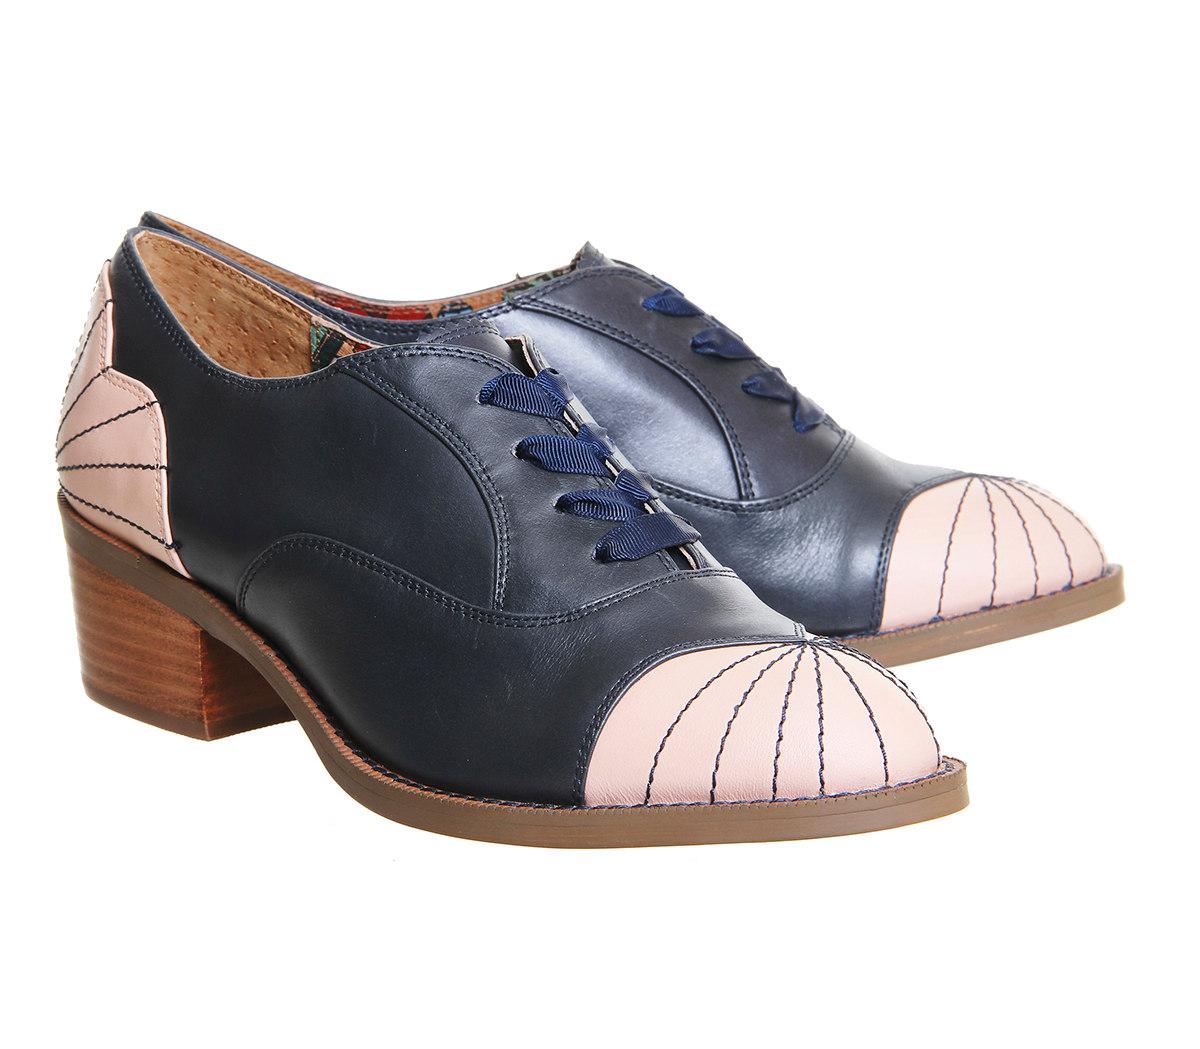 Miss Lfire Leather Williamsburg Shoe in Navy (Blue) Lyst